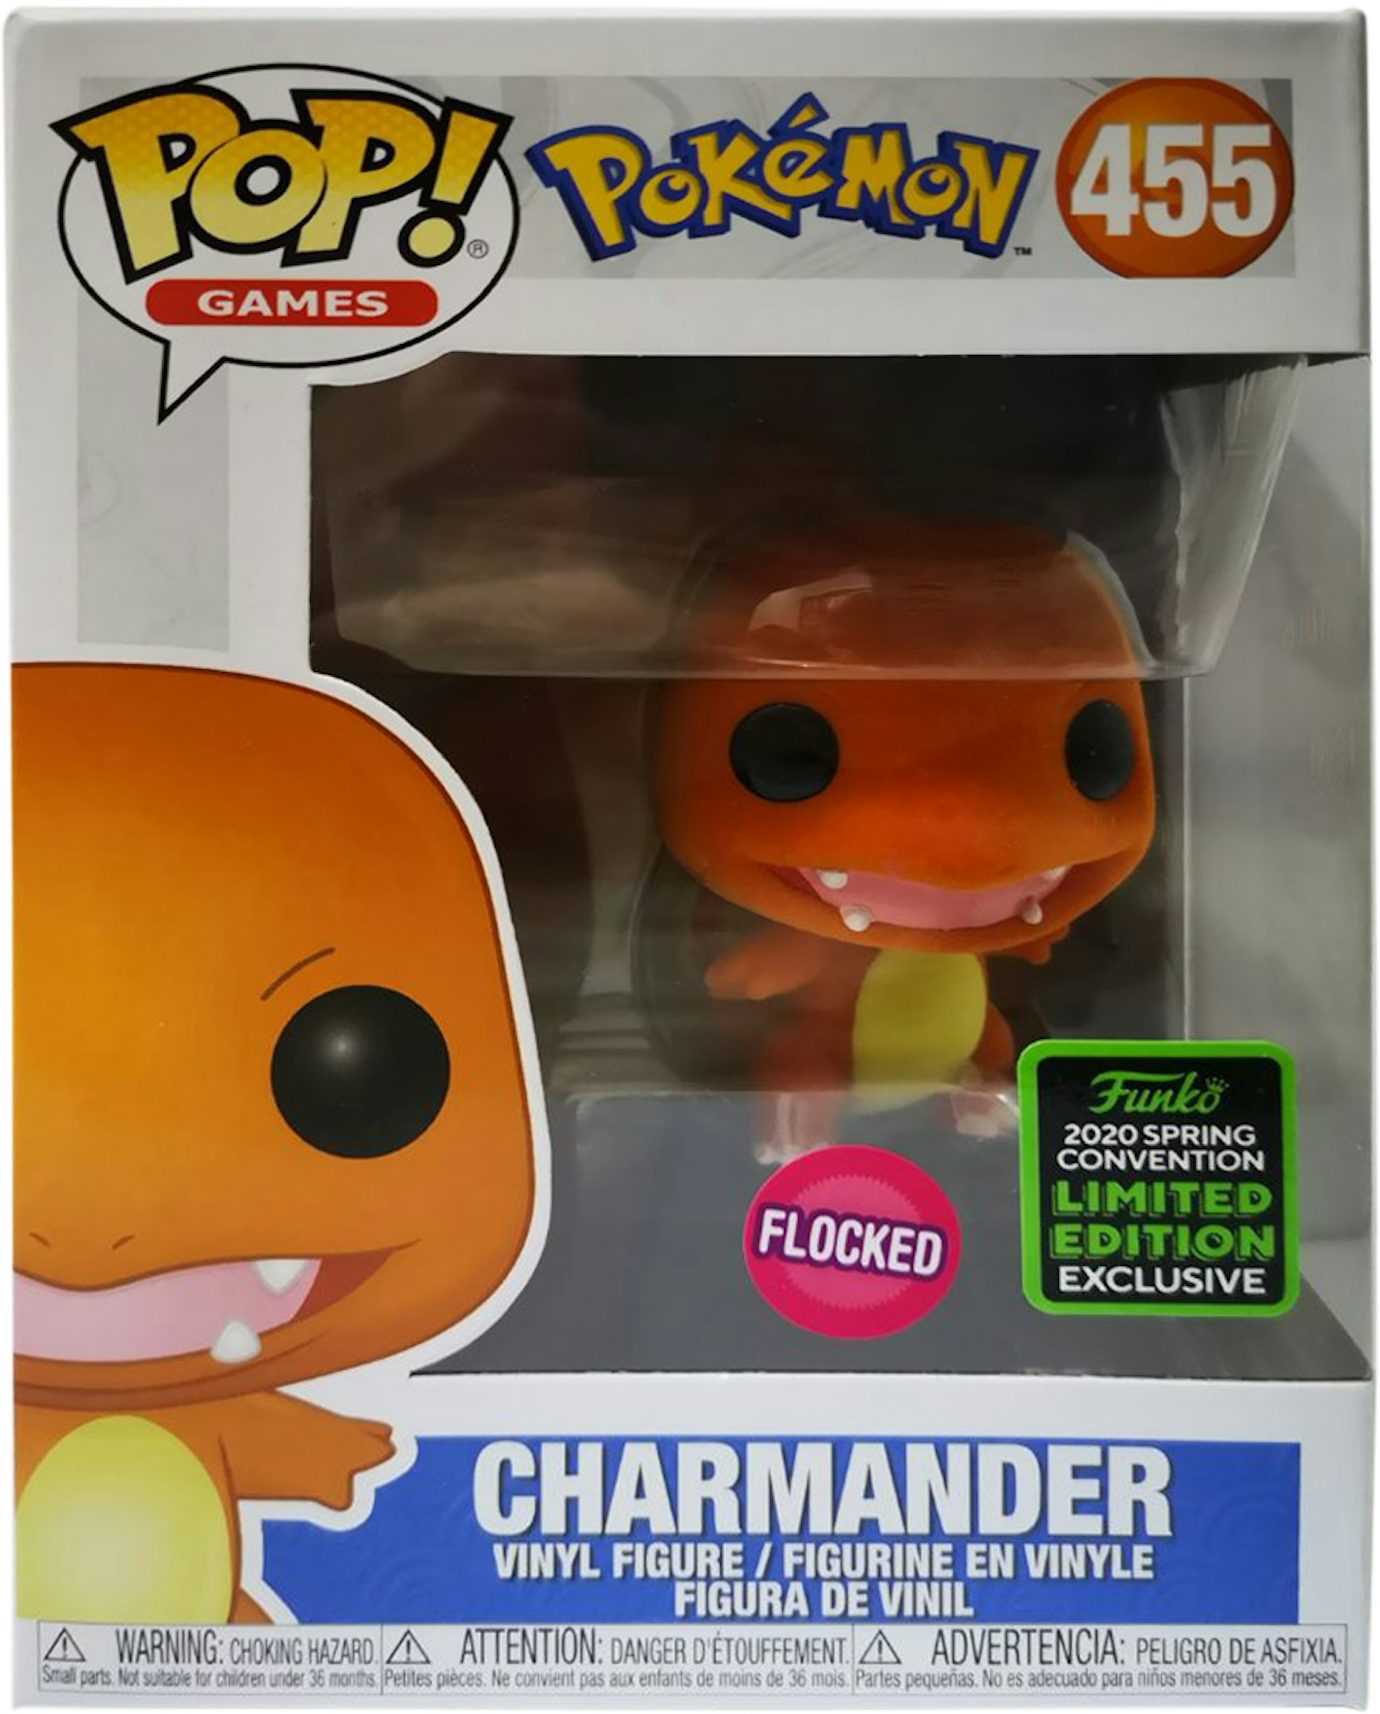 Funko Pop! Games Pokemon Mewtwo (Flocked) Summer Convention Exclusive  Figure #581 - US